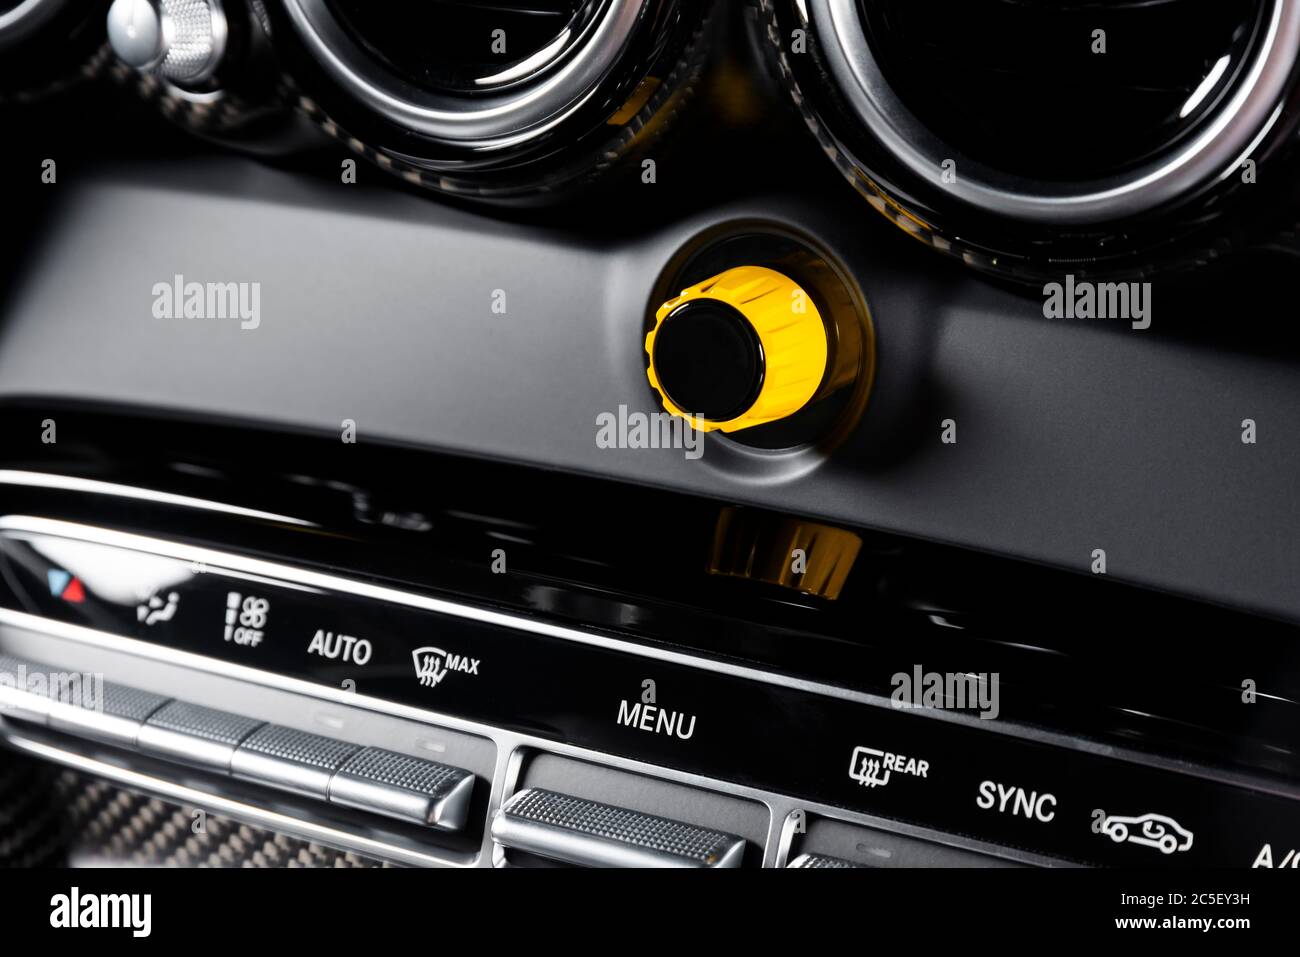 Car interior details, close up dashboard with buttons Stock Photo